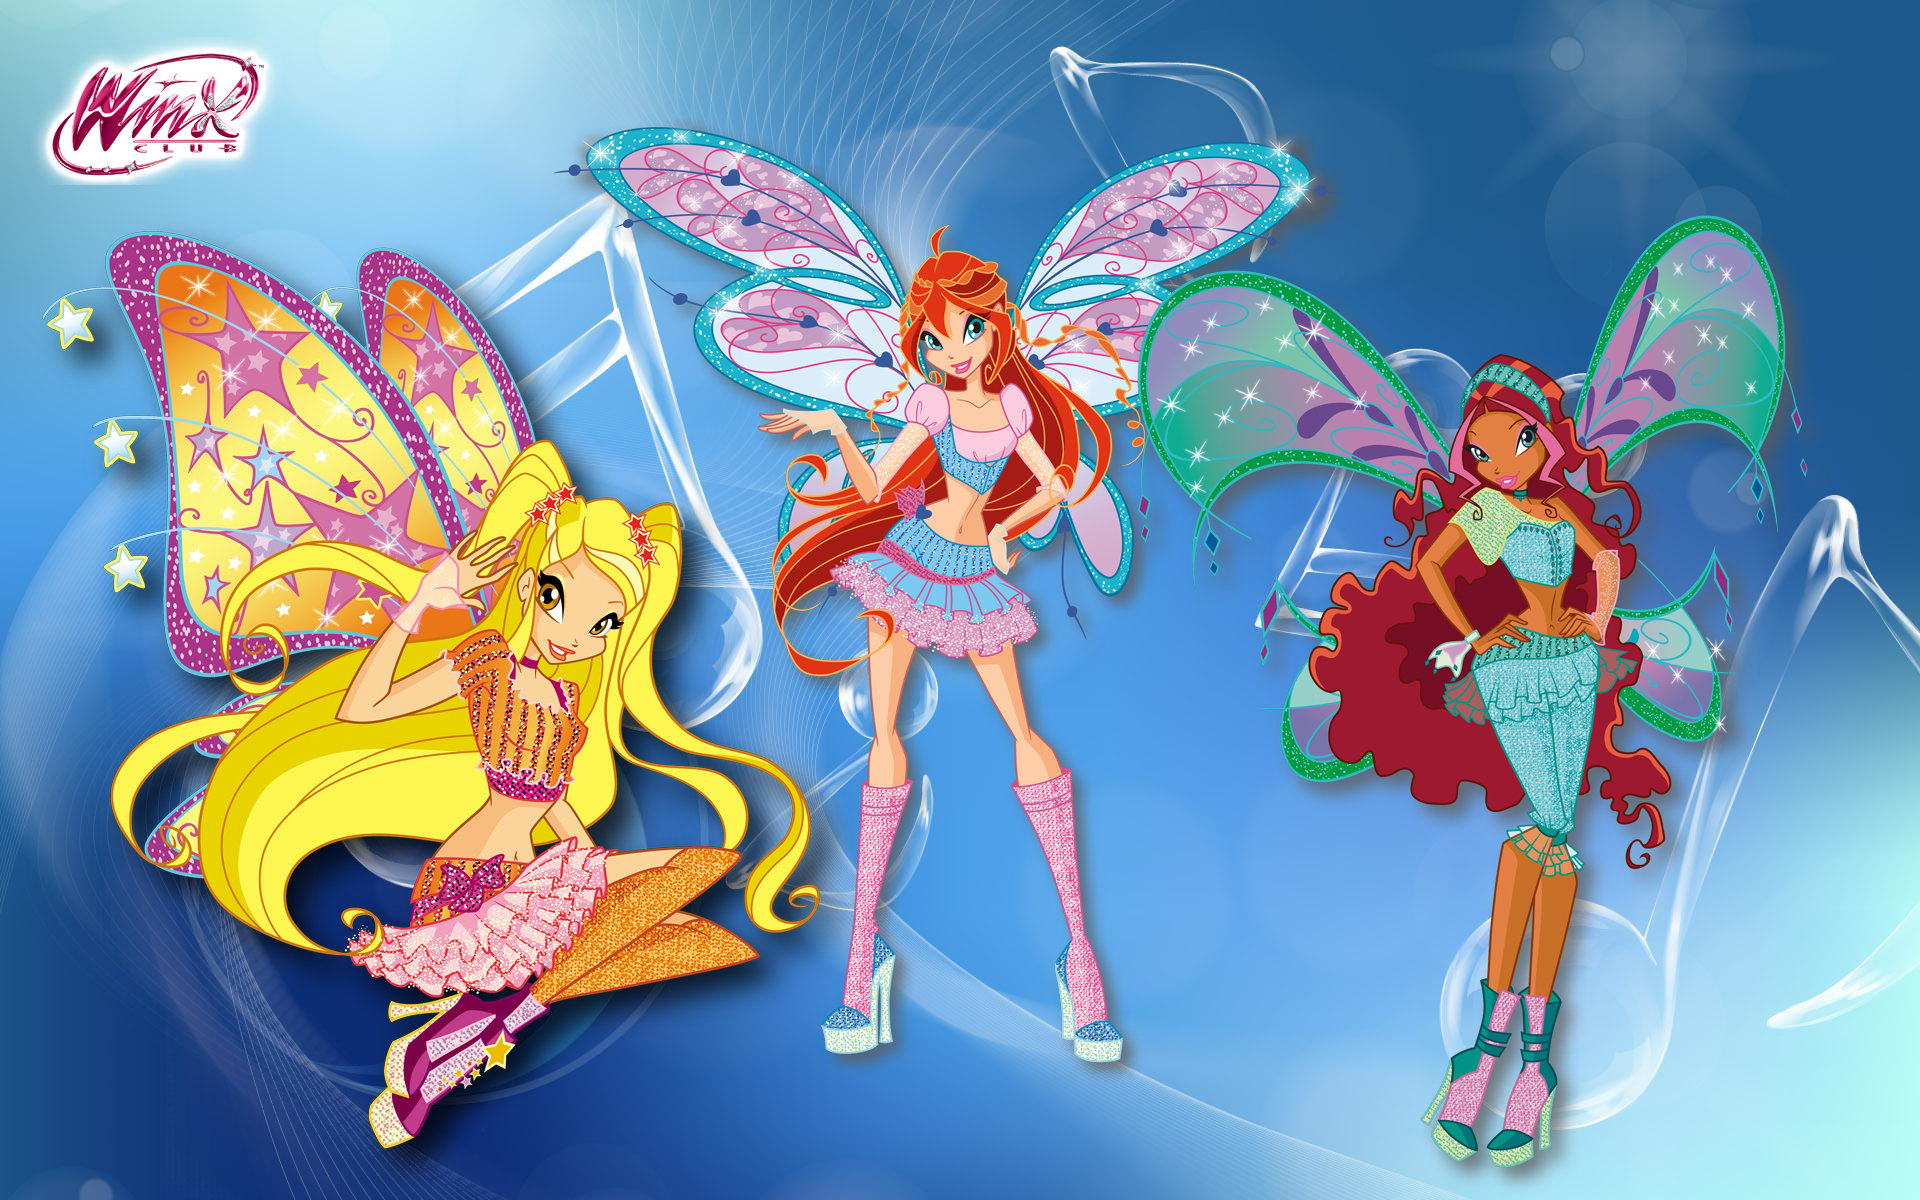 Winx Club Wide Wallpapers   Wallpaper High Definition High Quality